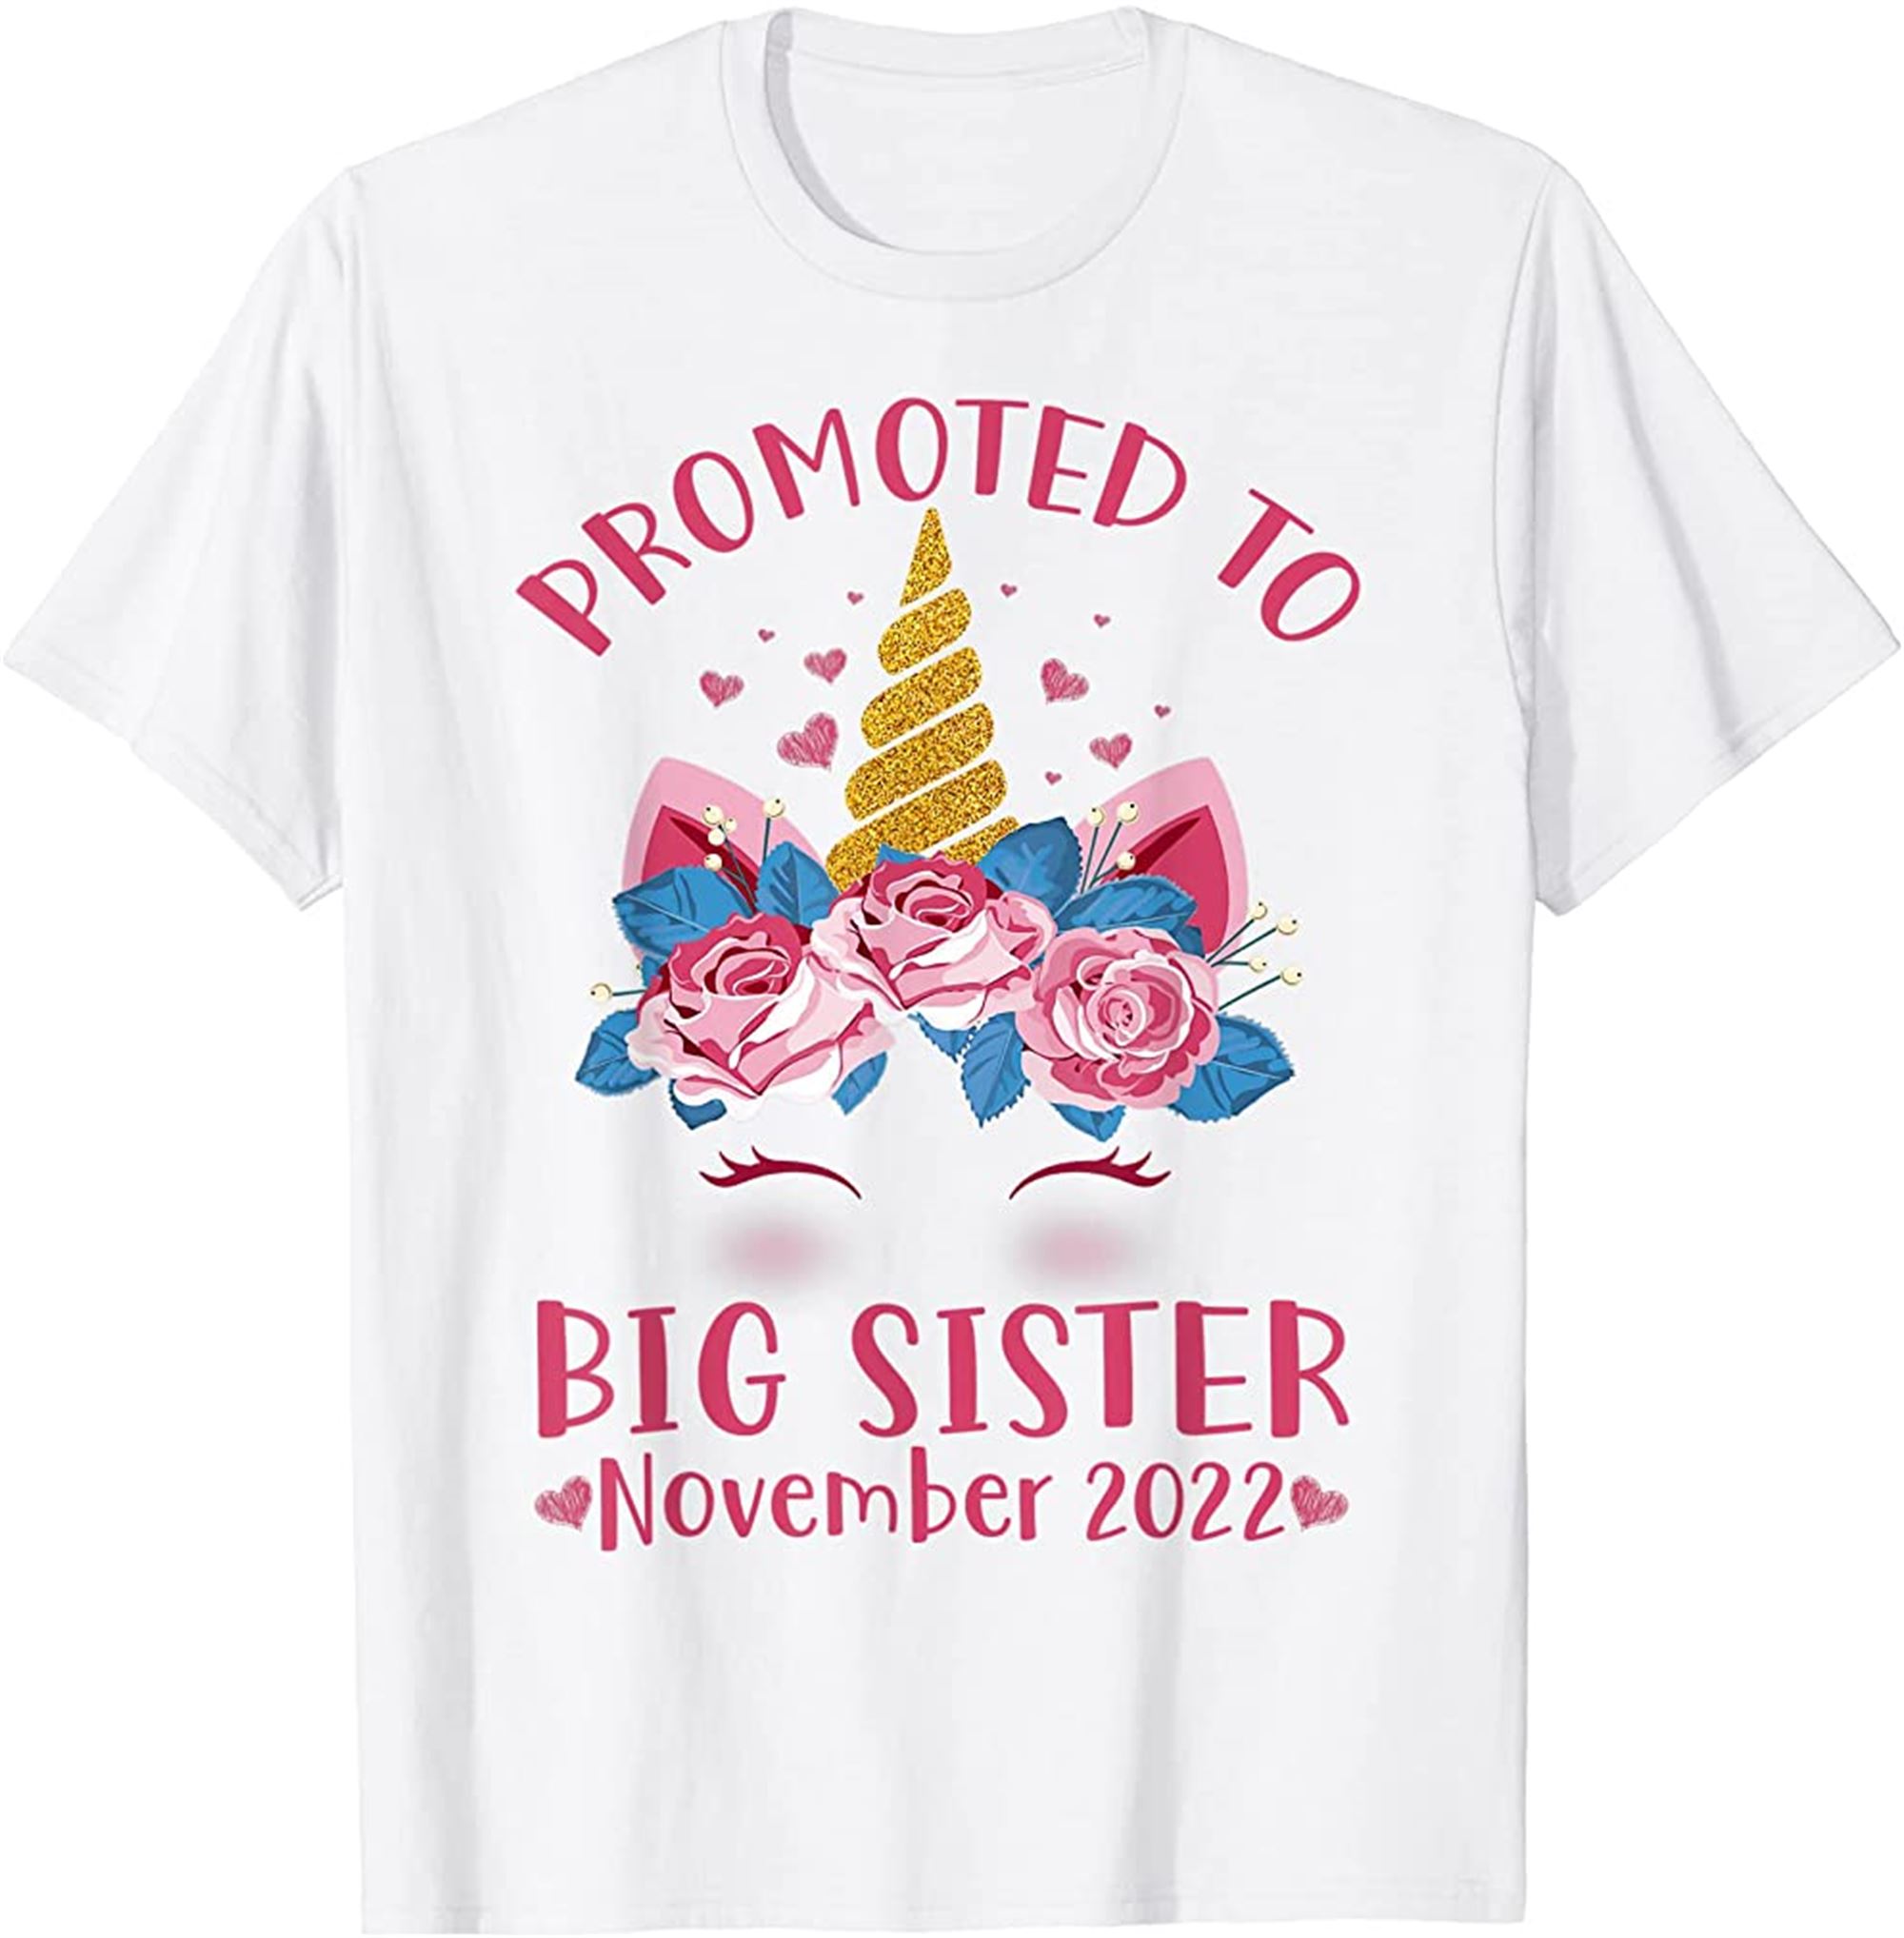 Promoted To Big Sister November 2022 Unicorn Baby Shower T-shirt Full Size Up To 5xl